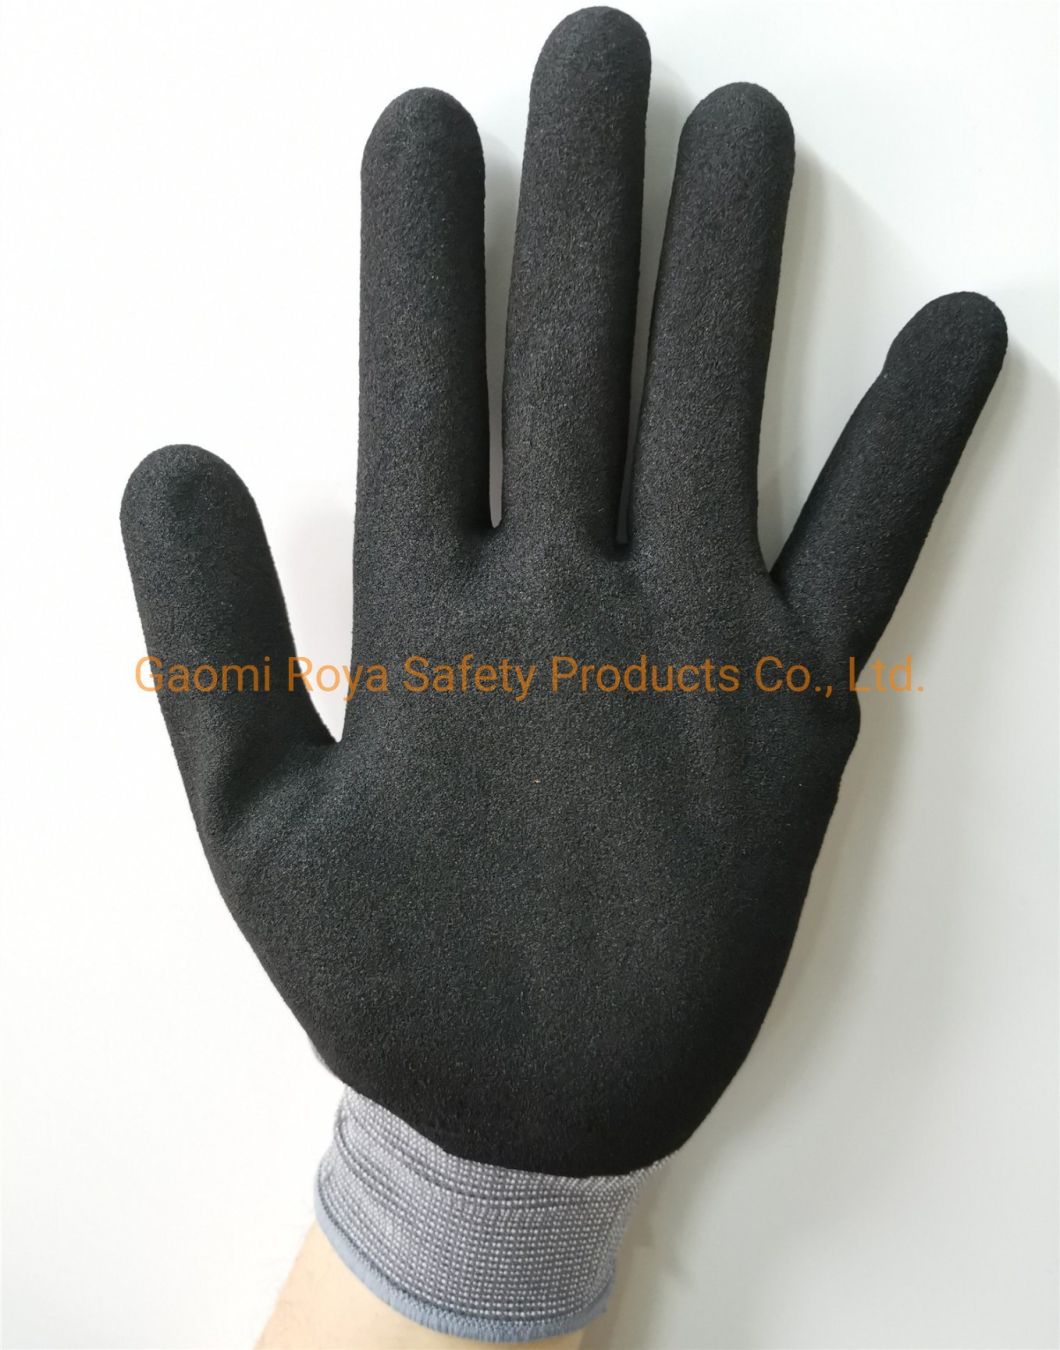 Protect Hand Safety Gloves Nylon Shell Nitrile Coated Work Gloves Industrial Work Gloves